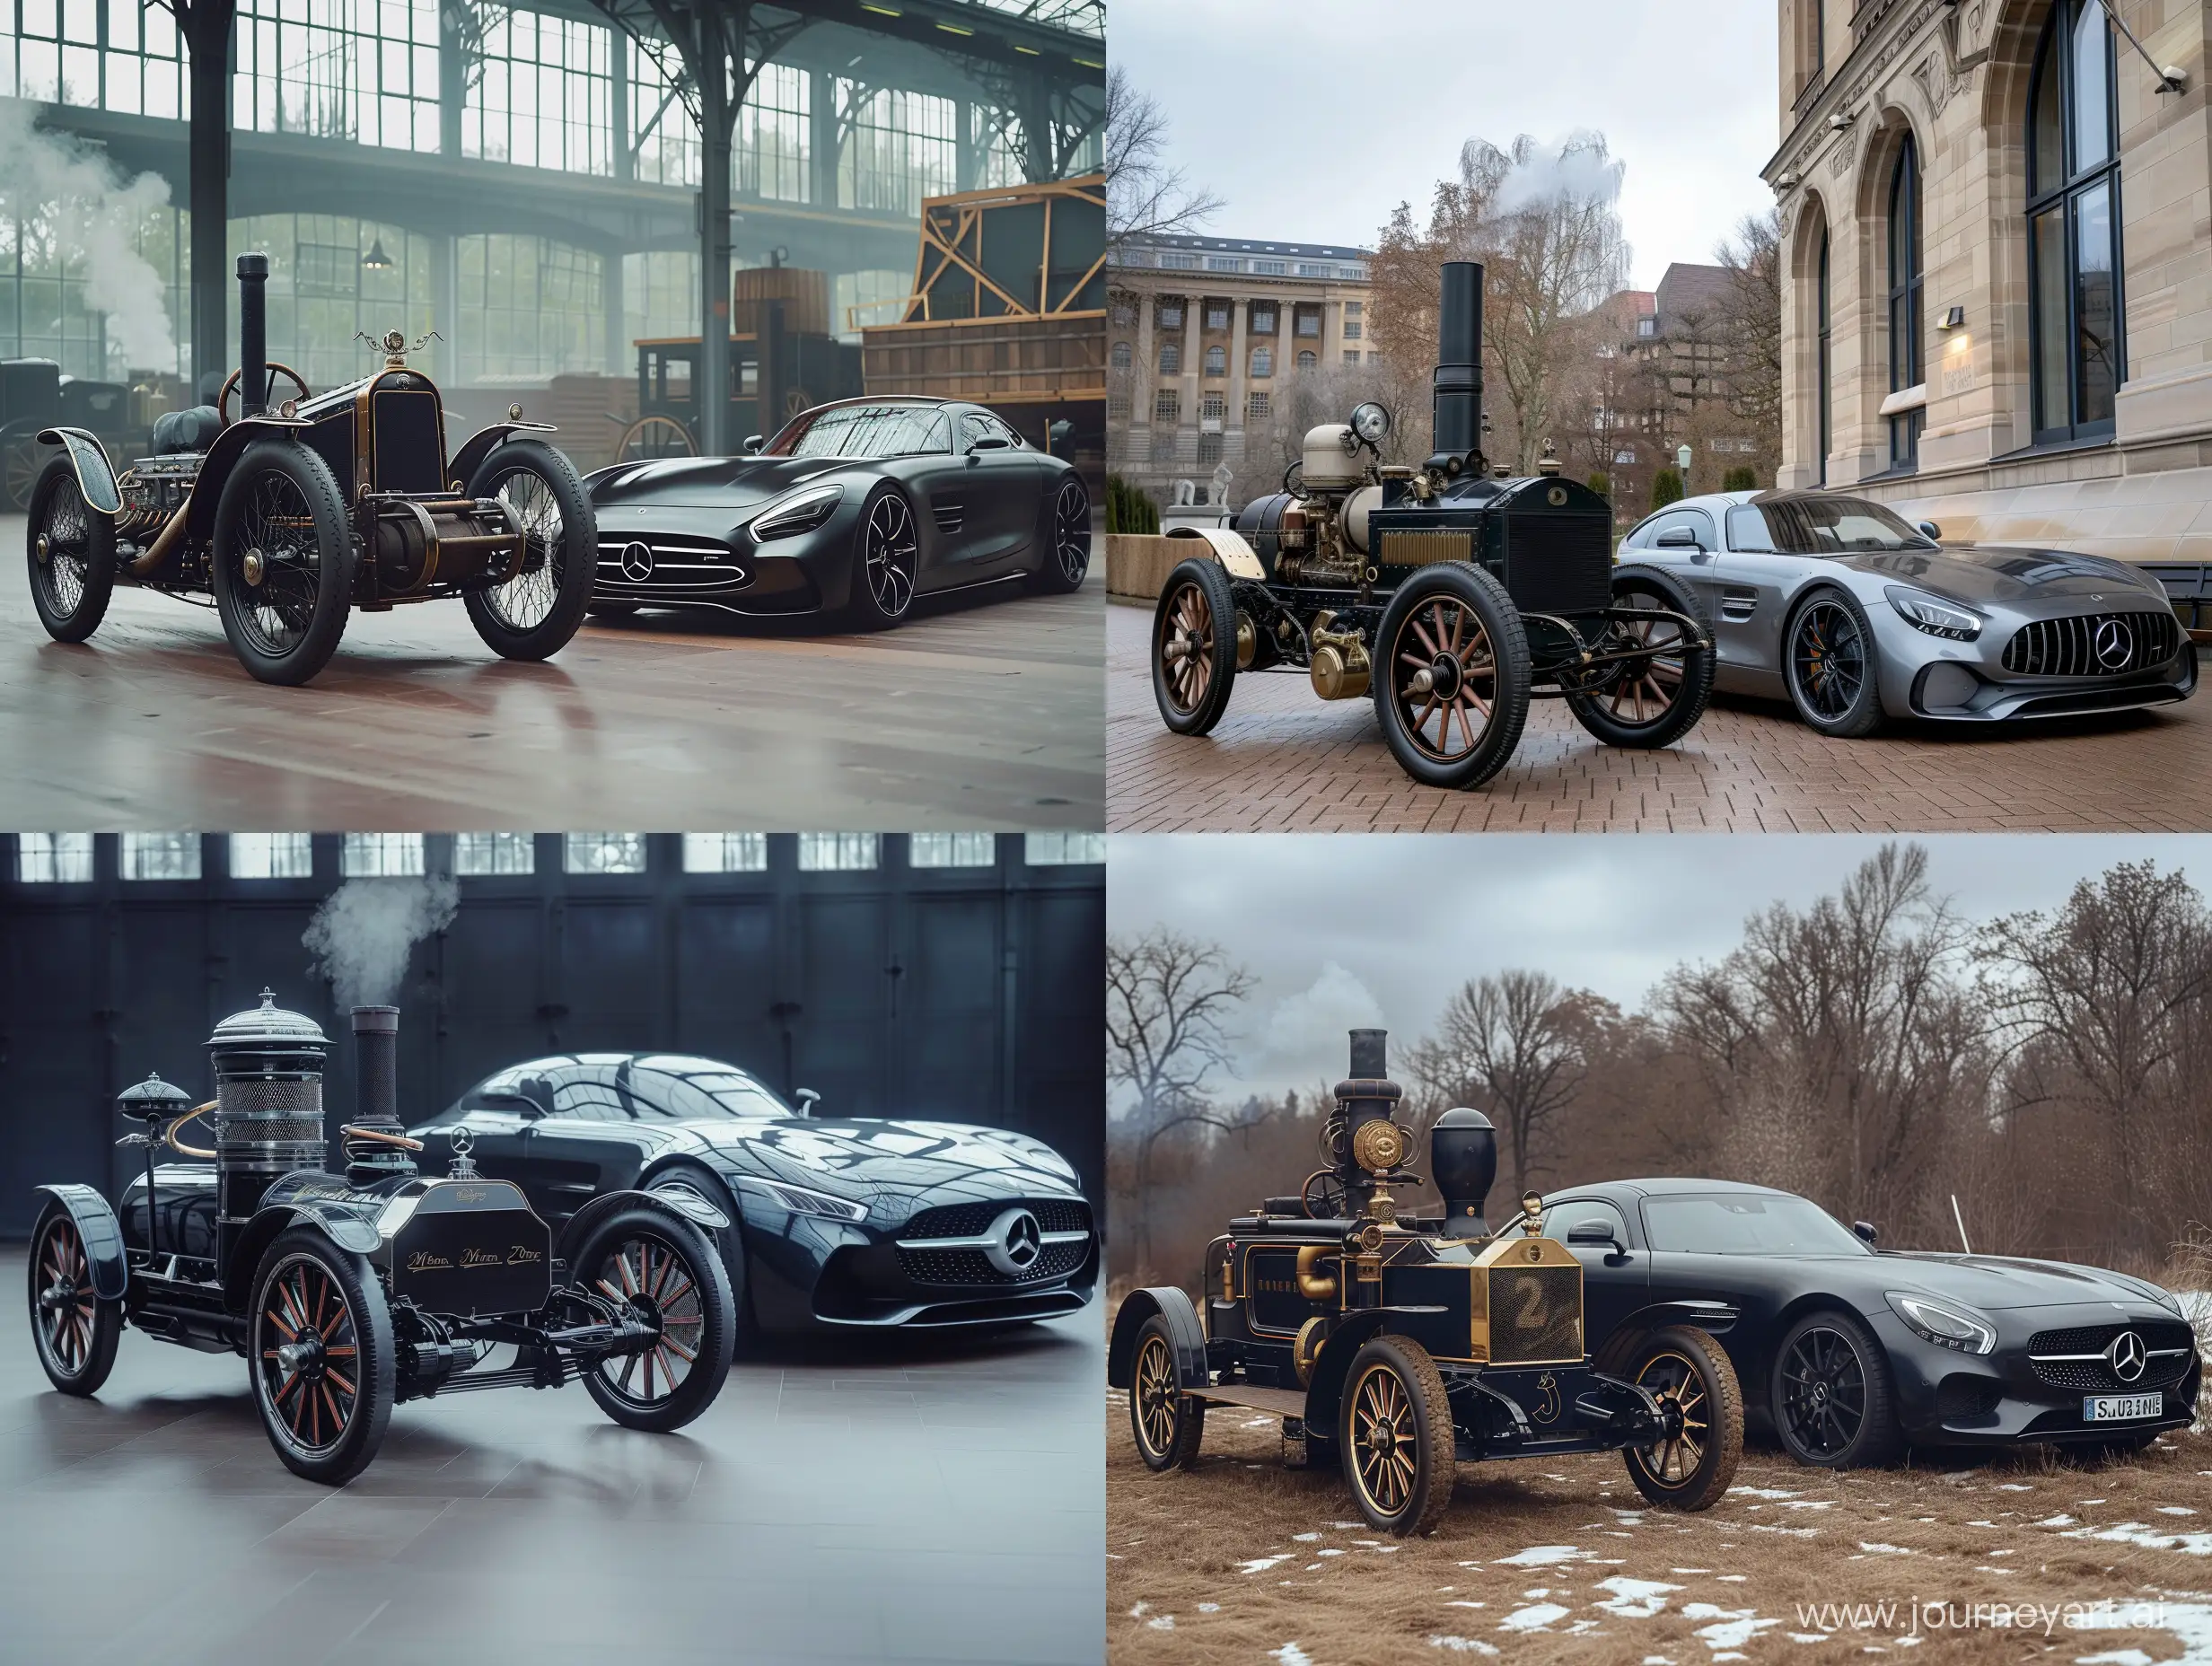 Contrast-of-SteamPowered-Vintage-Car-and-Modern-Mercedes-S-400